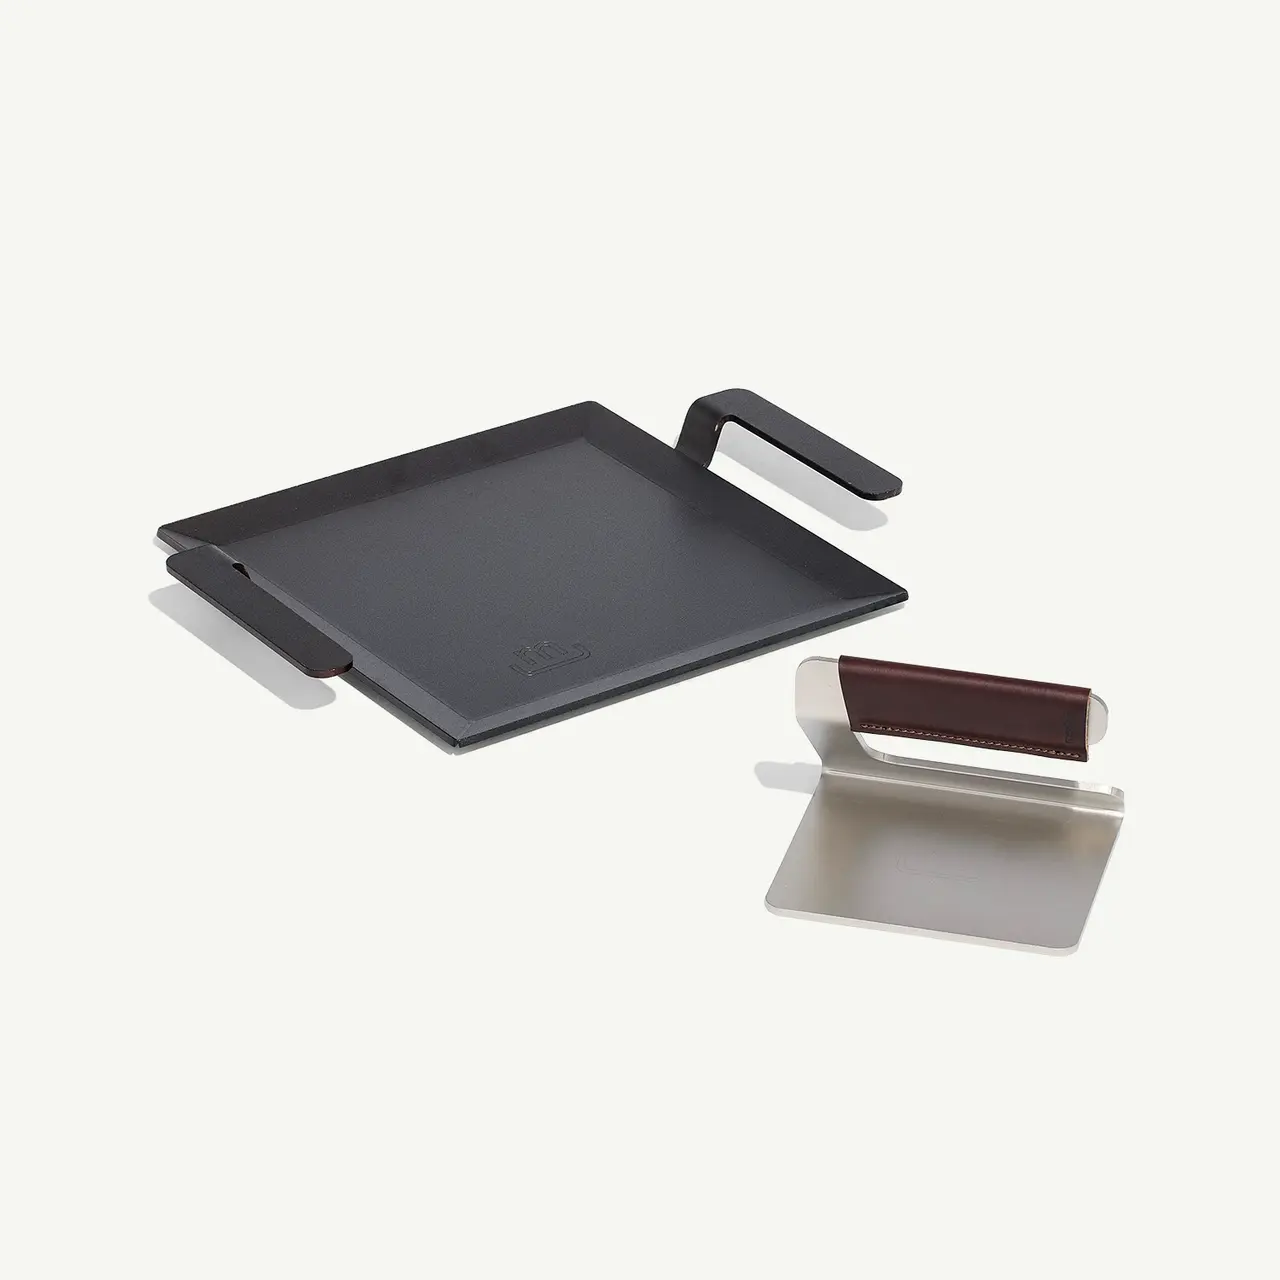 A black griddle pan and a white and brown squeegee on a light background.